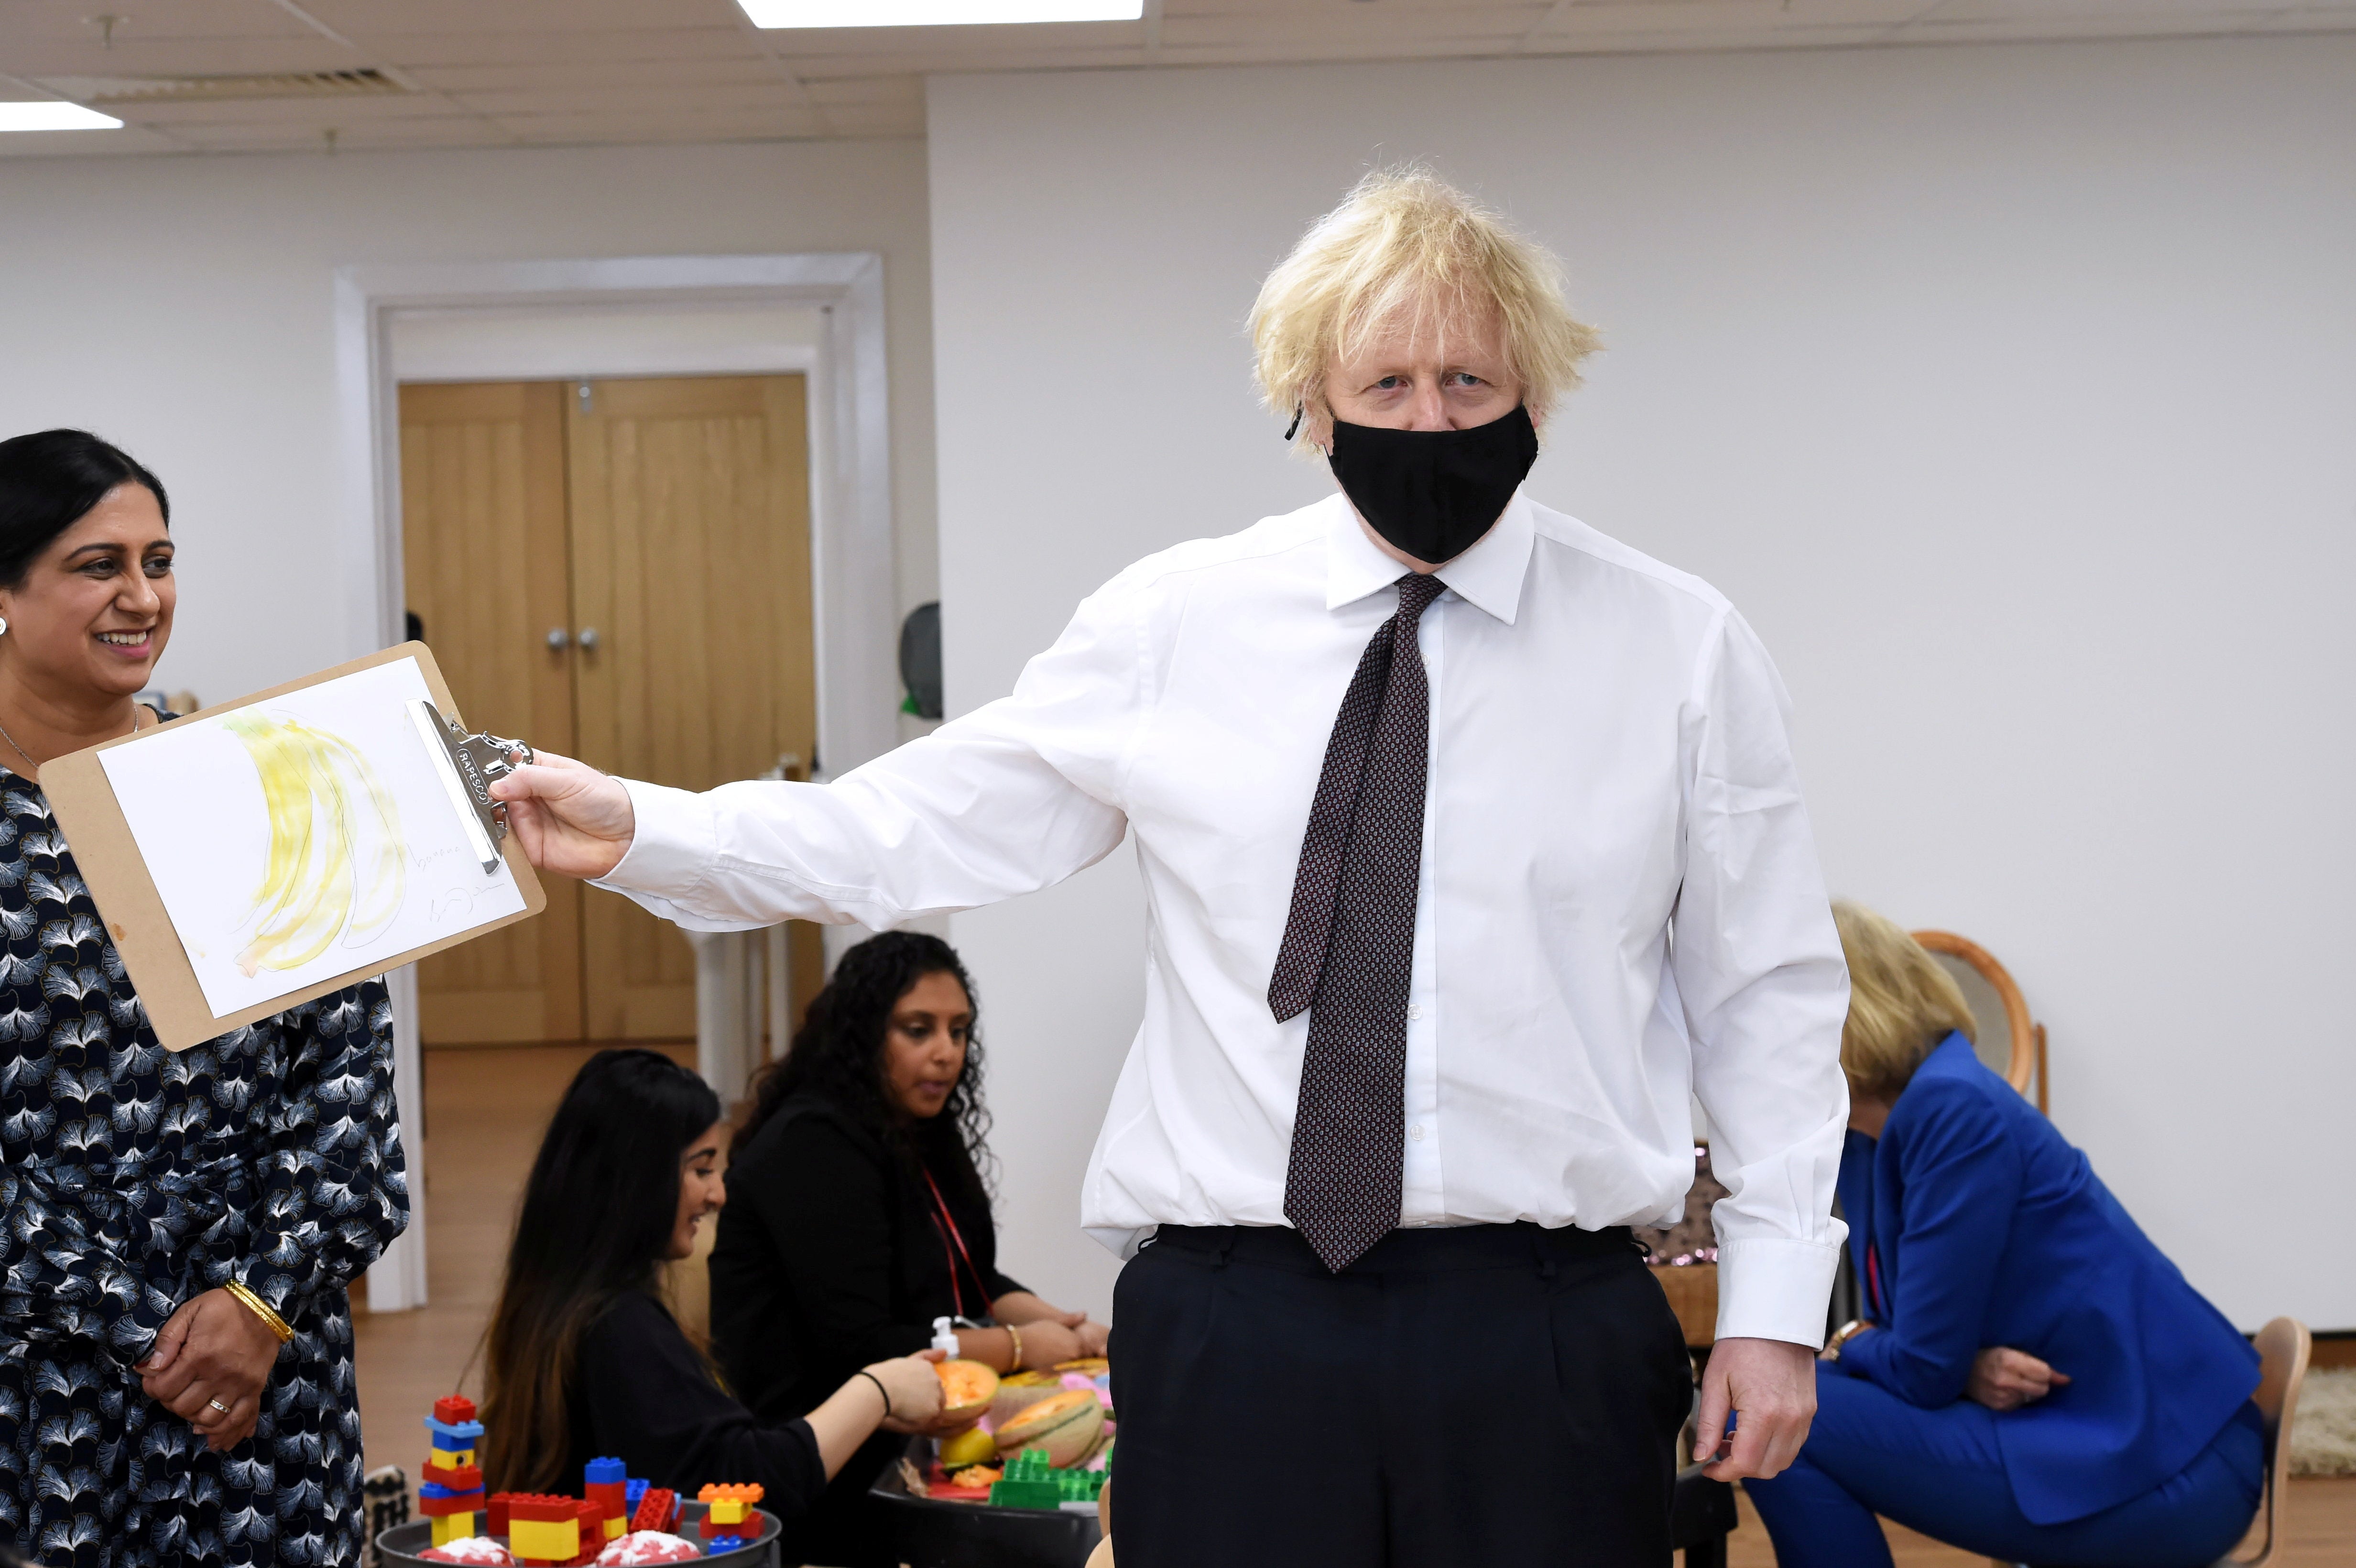 Boris Johnson displays his banana drawing during a visit to Monkey Puzzle Nursery in Greenford, west London, on Thursday